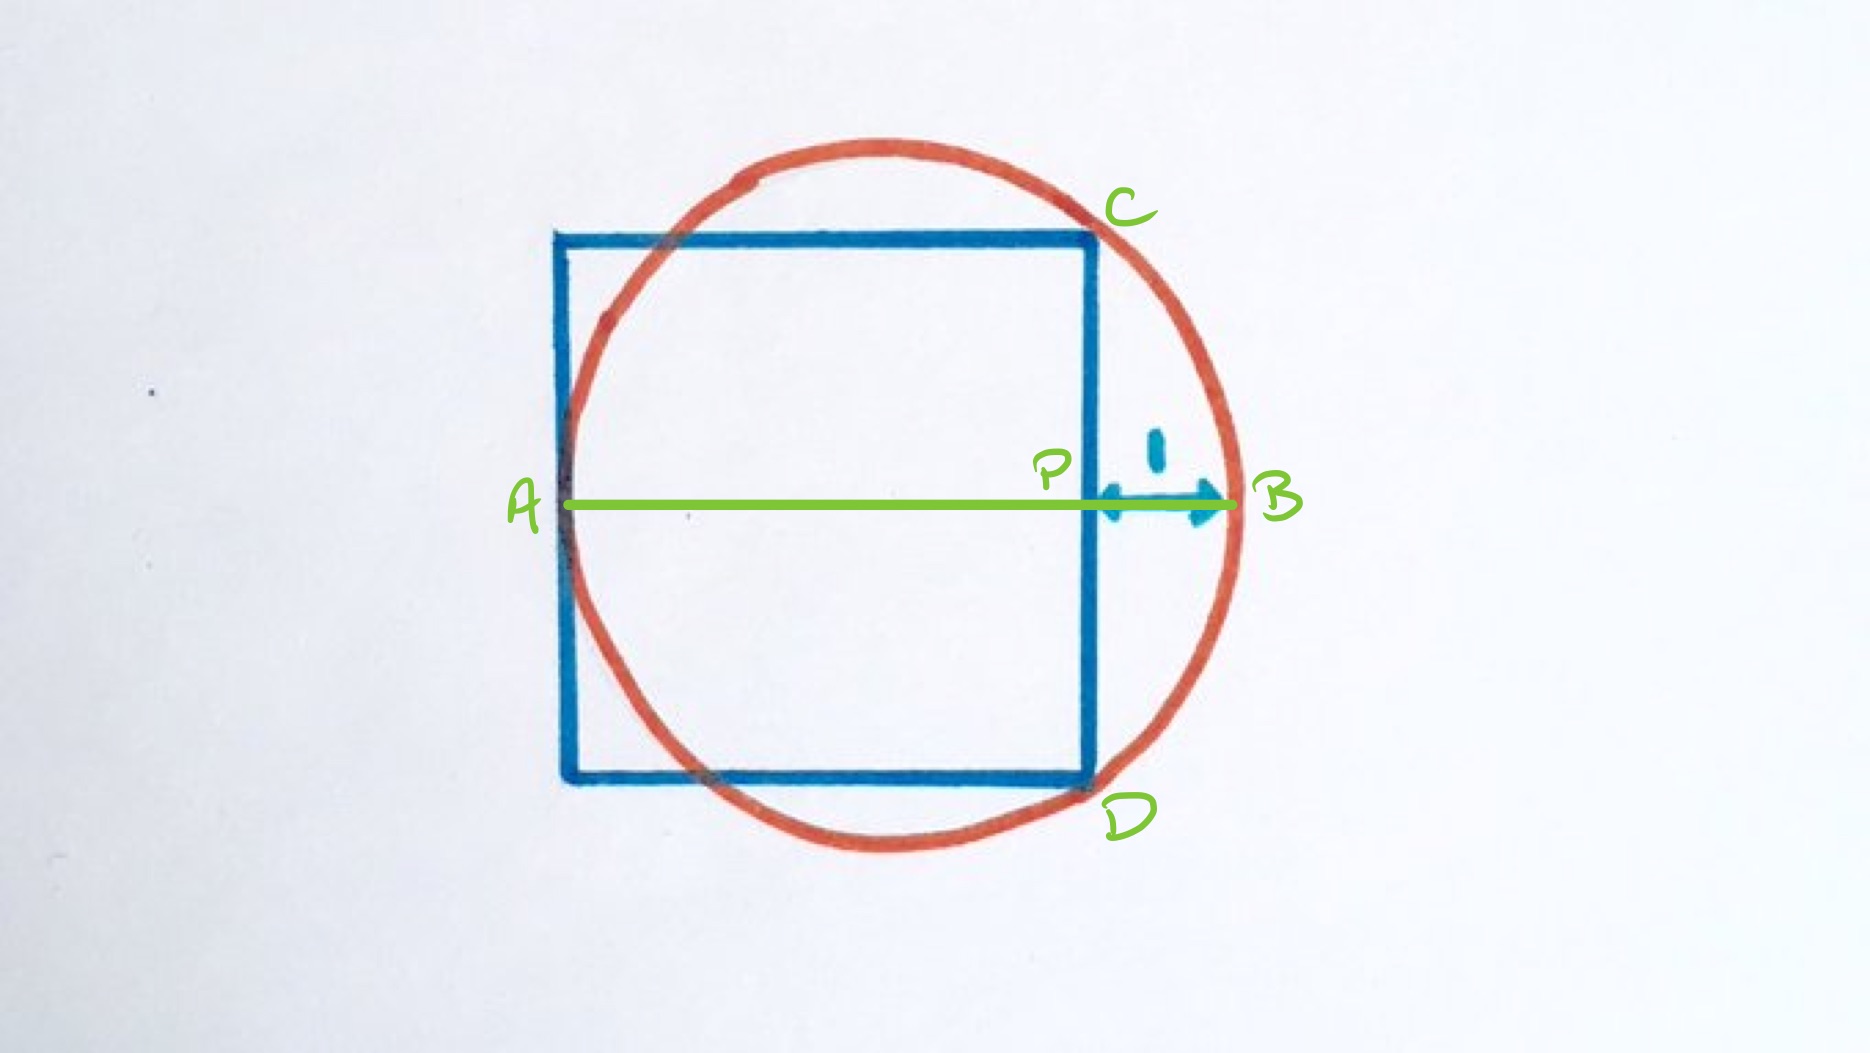 Overlapping square and circle labelled